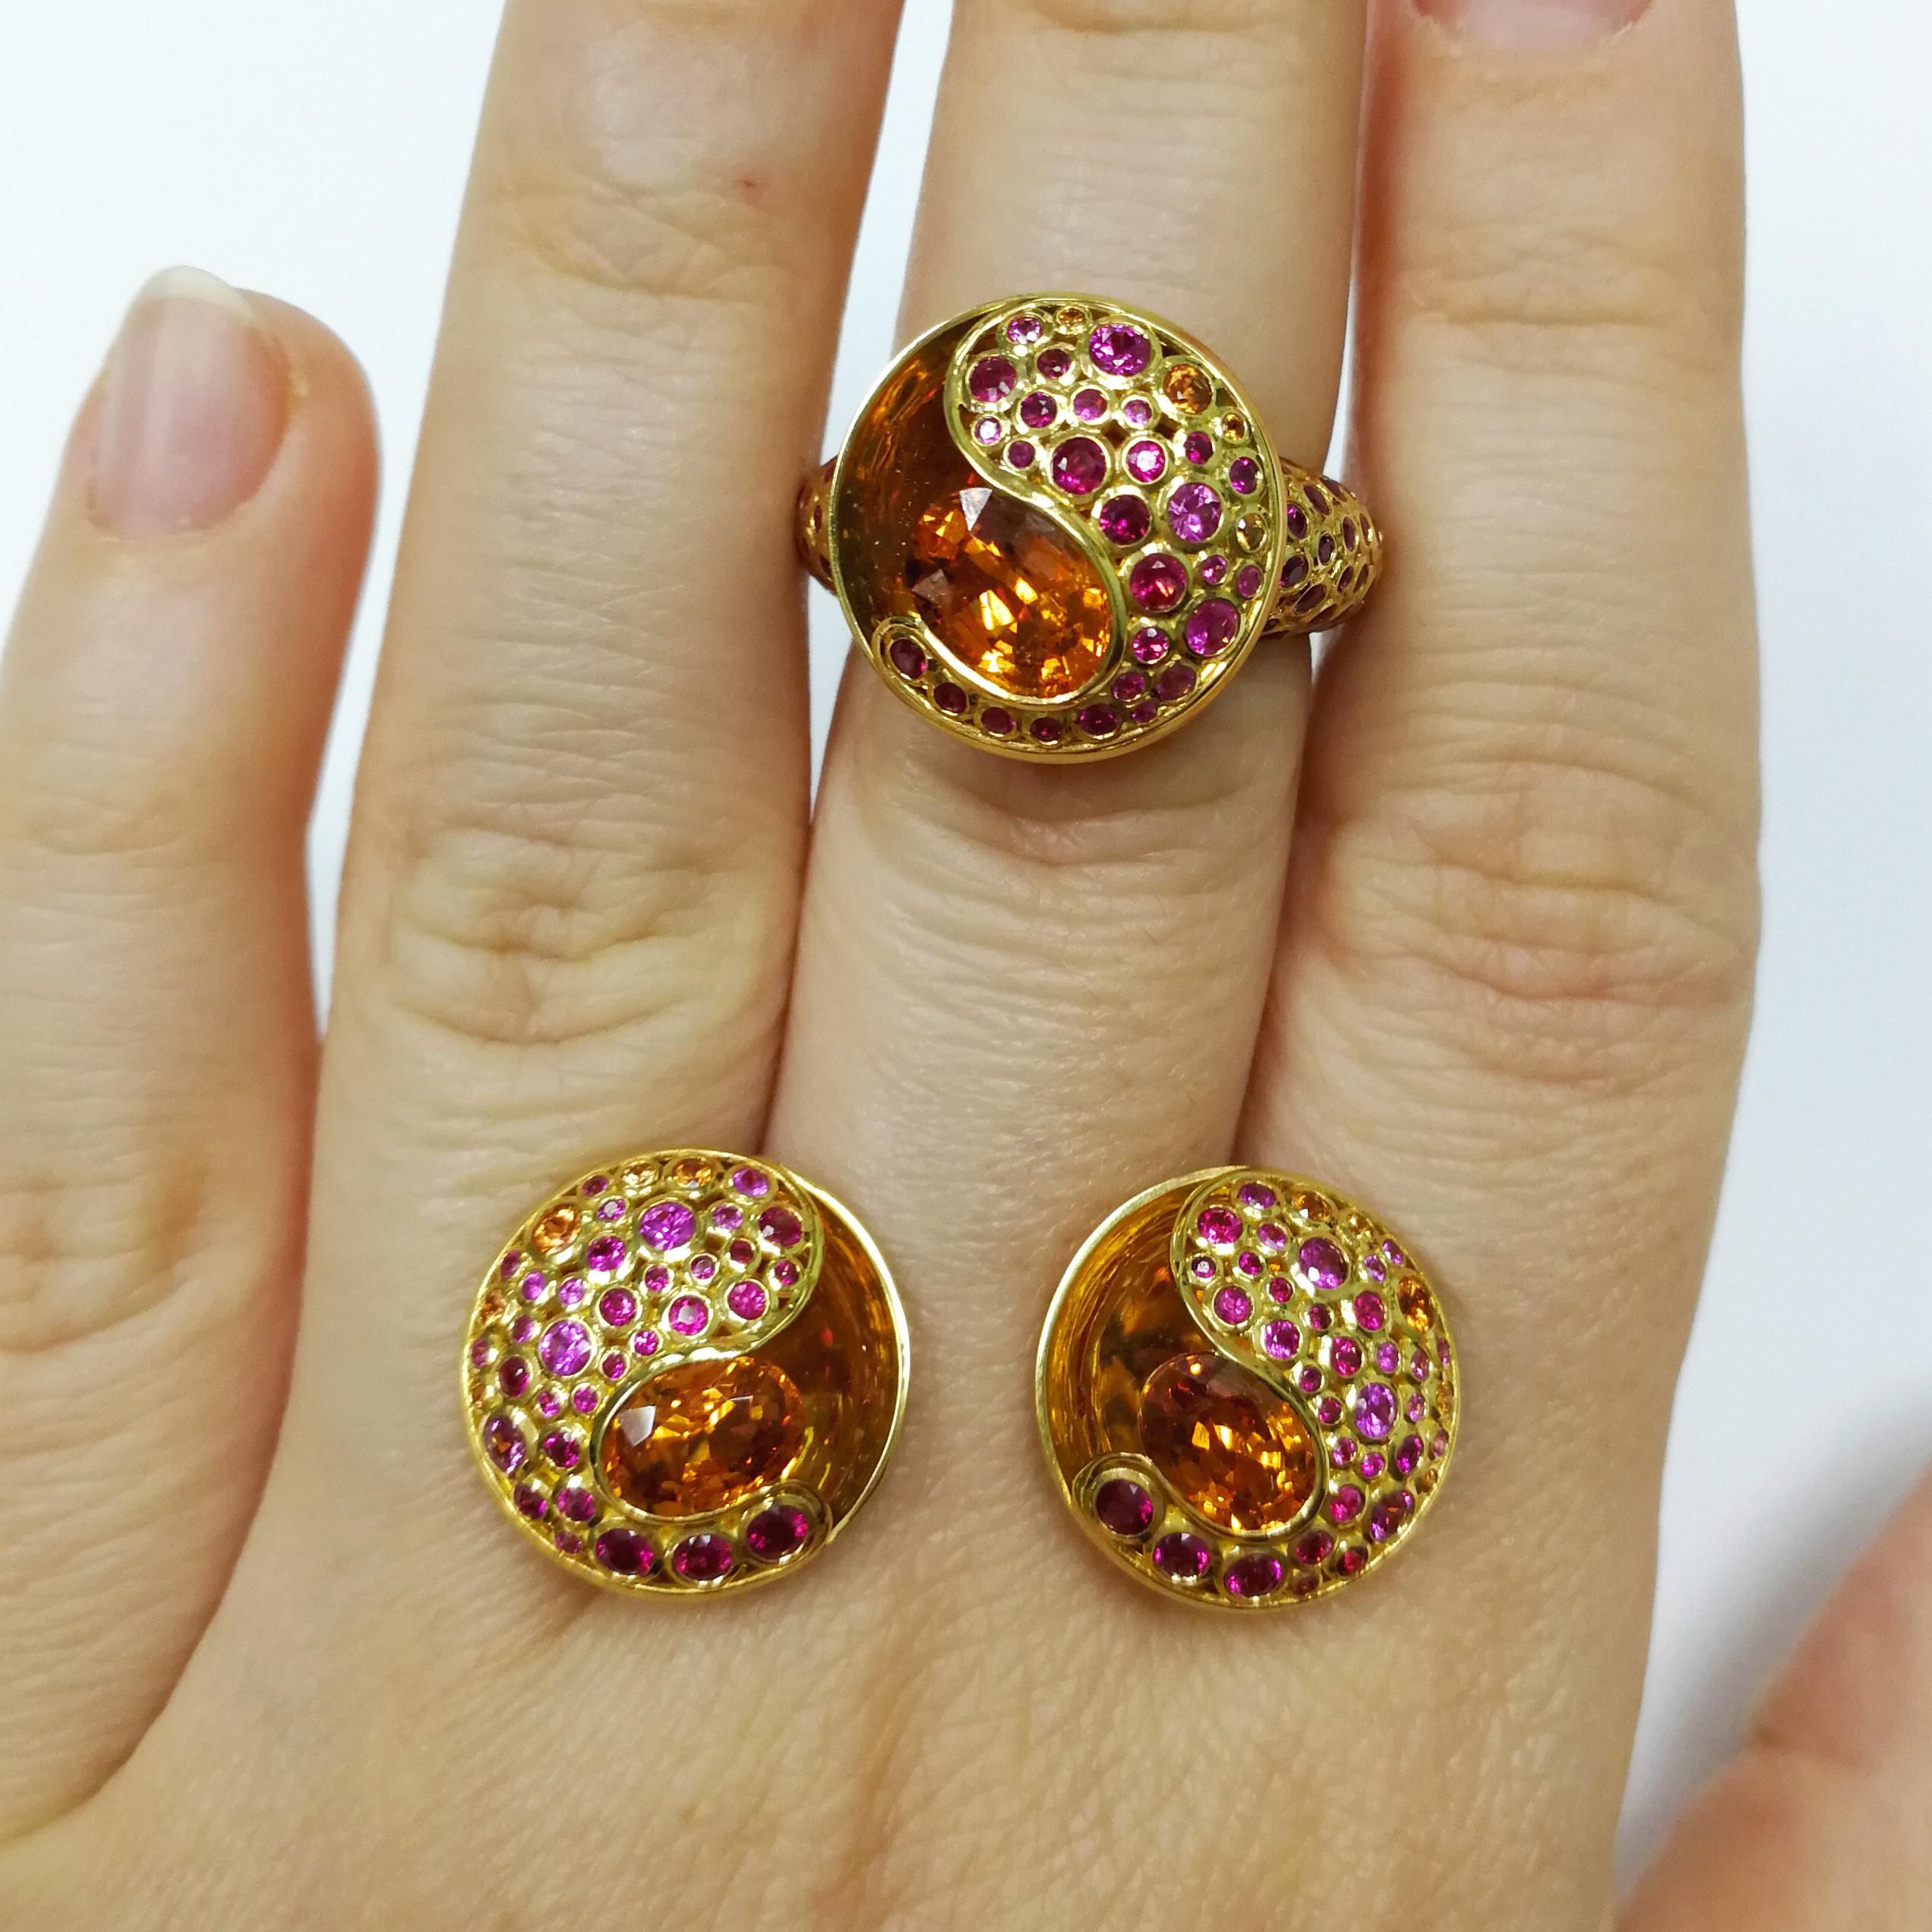 Spessartine Ruby Sapphire 18 Karat Yellow Gold Bubble Suite
Incredibly light and airy Suite from our Bubbles Collection. Yellow 18 Karat Gold is made in the form of variety of small bubbles, some of which have Rubies and Pink and Orange Sapphires